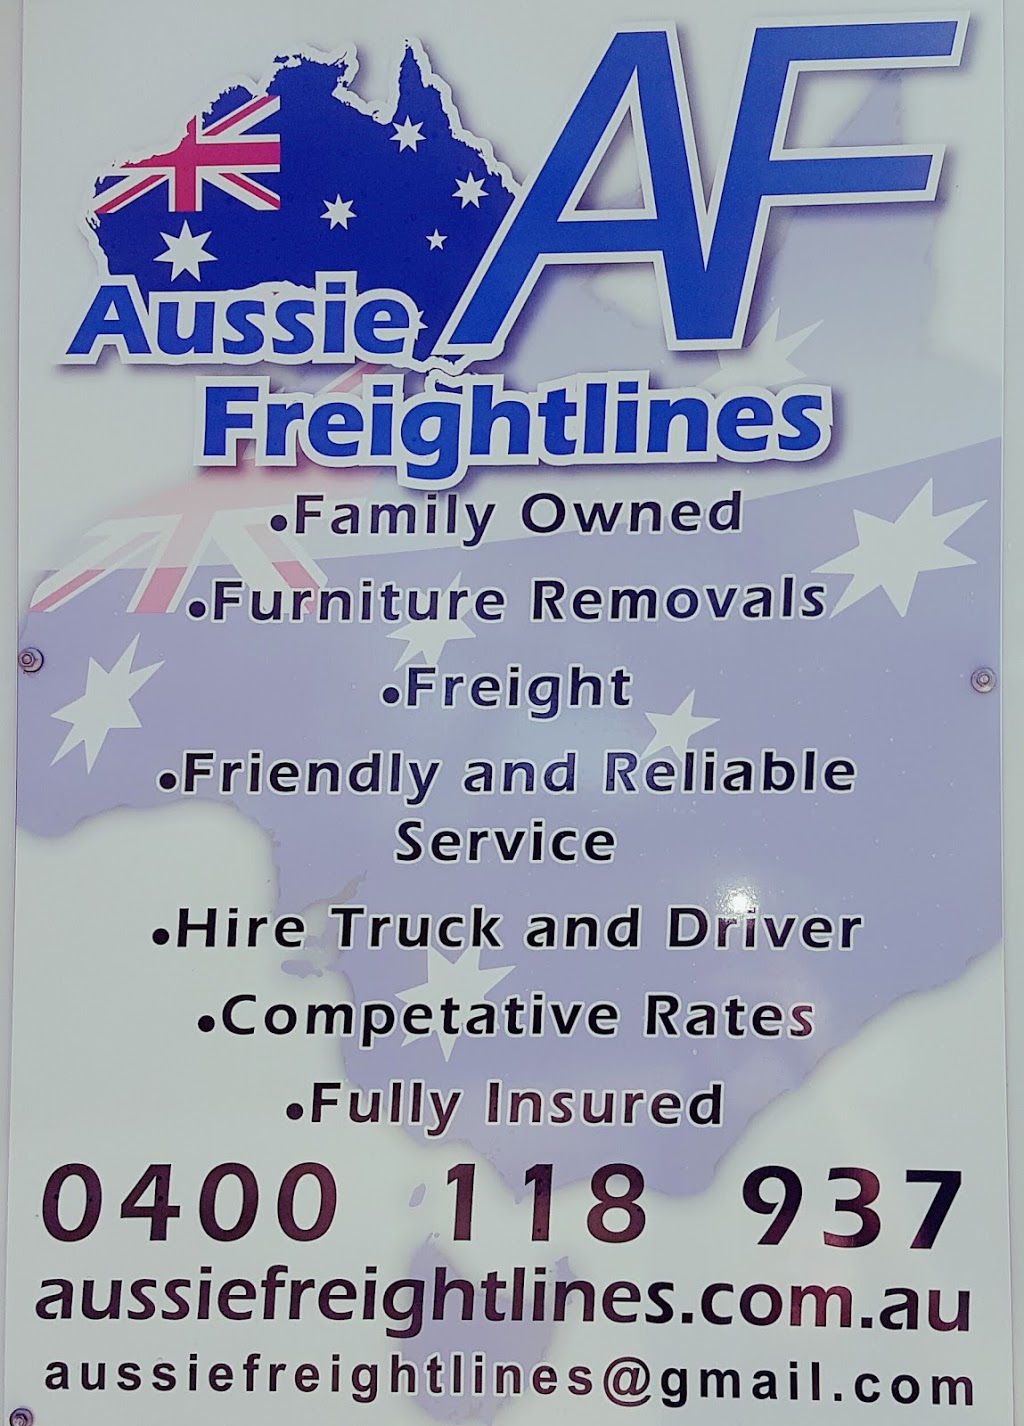 Aussie Freightlines | 507A Hill Rd, Stanmore QLD 4514, Australia | Phone: 0400 118 937